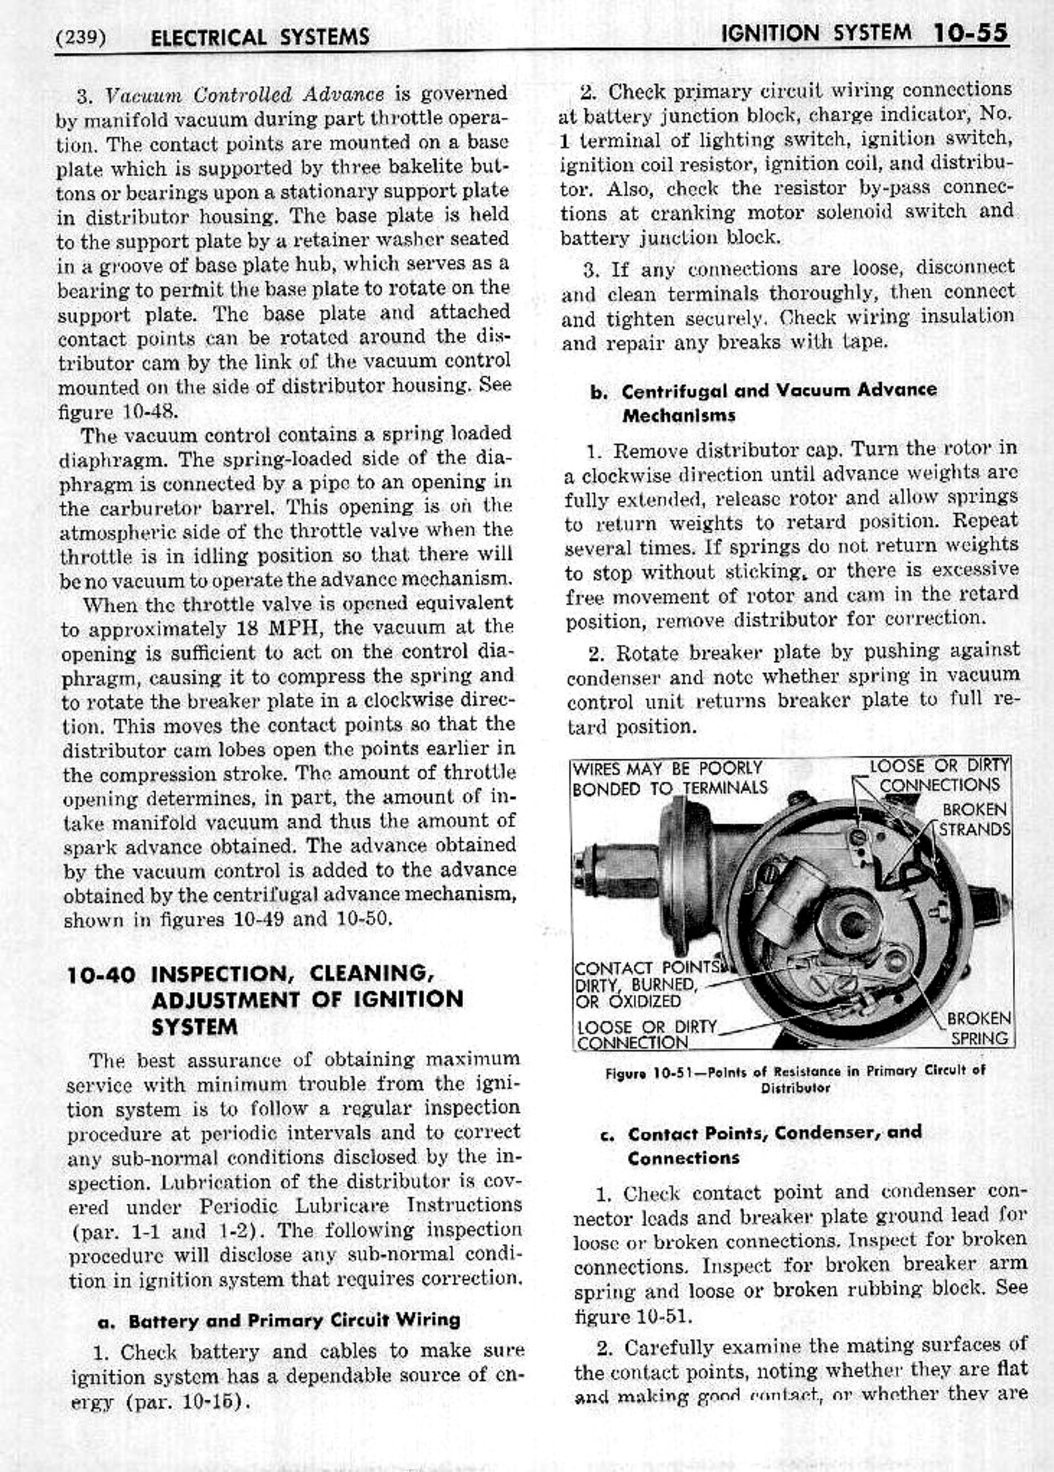 n_11 1953 Buick Shop Manual - Electrical Systems-055-055.jpg